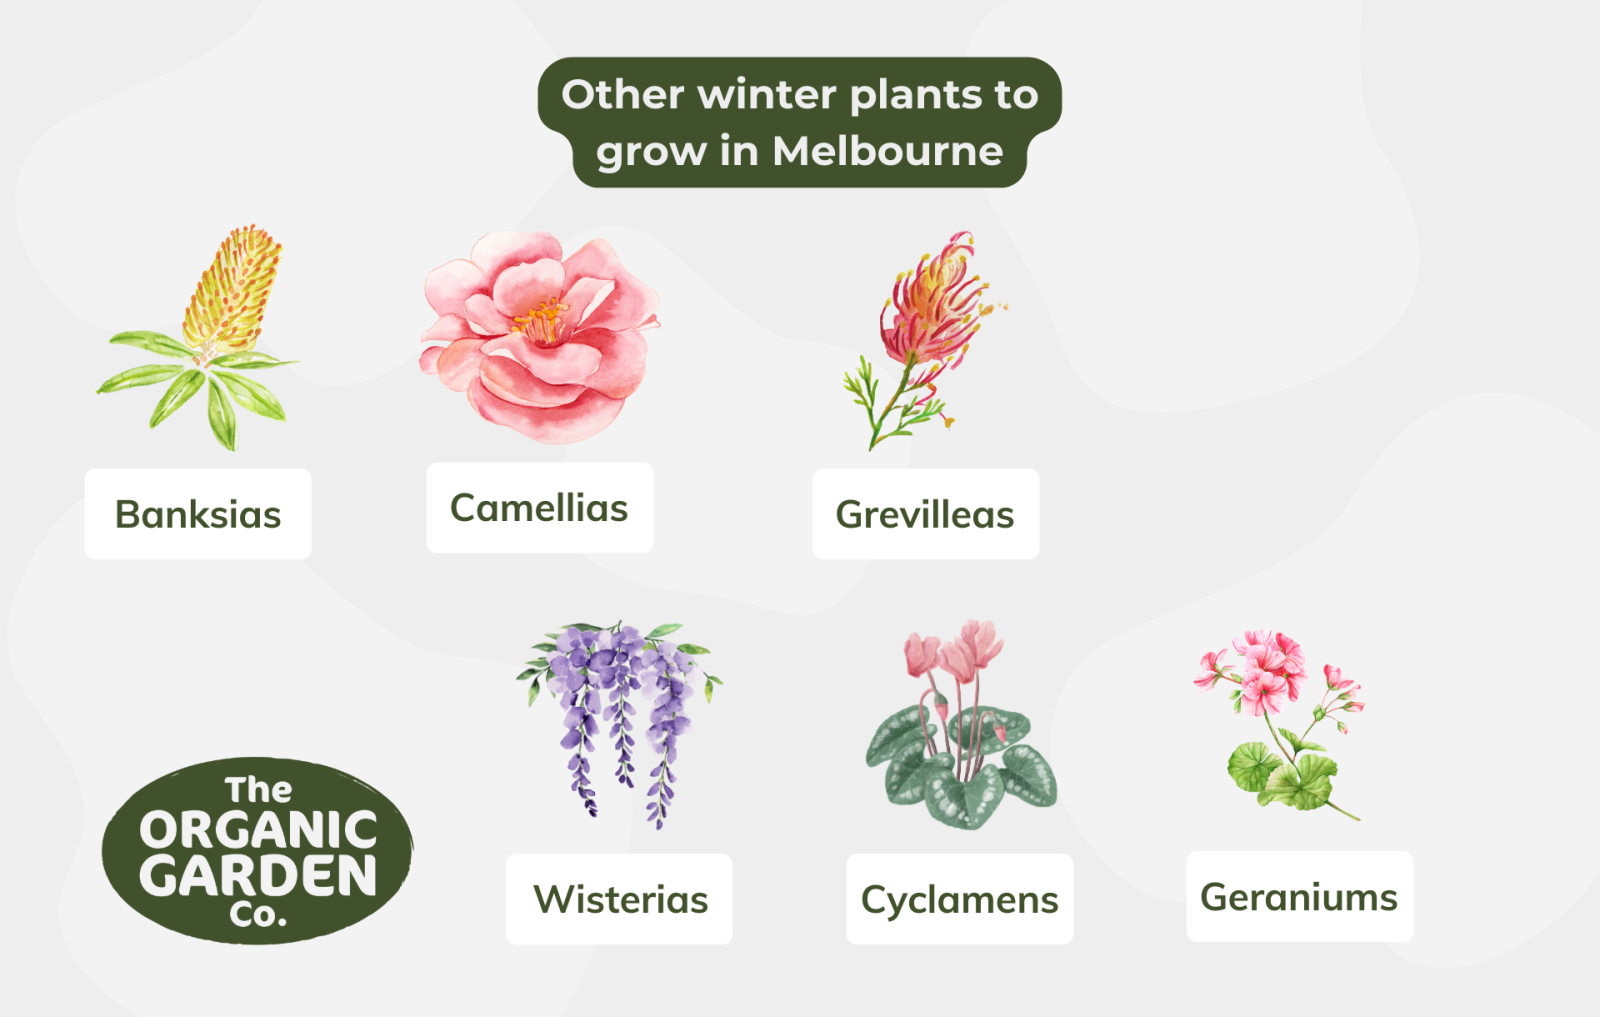 Other winter plants to grow in Melbourne